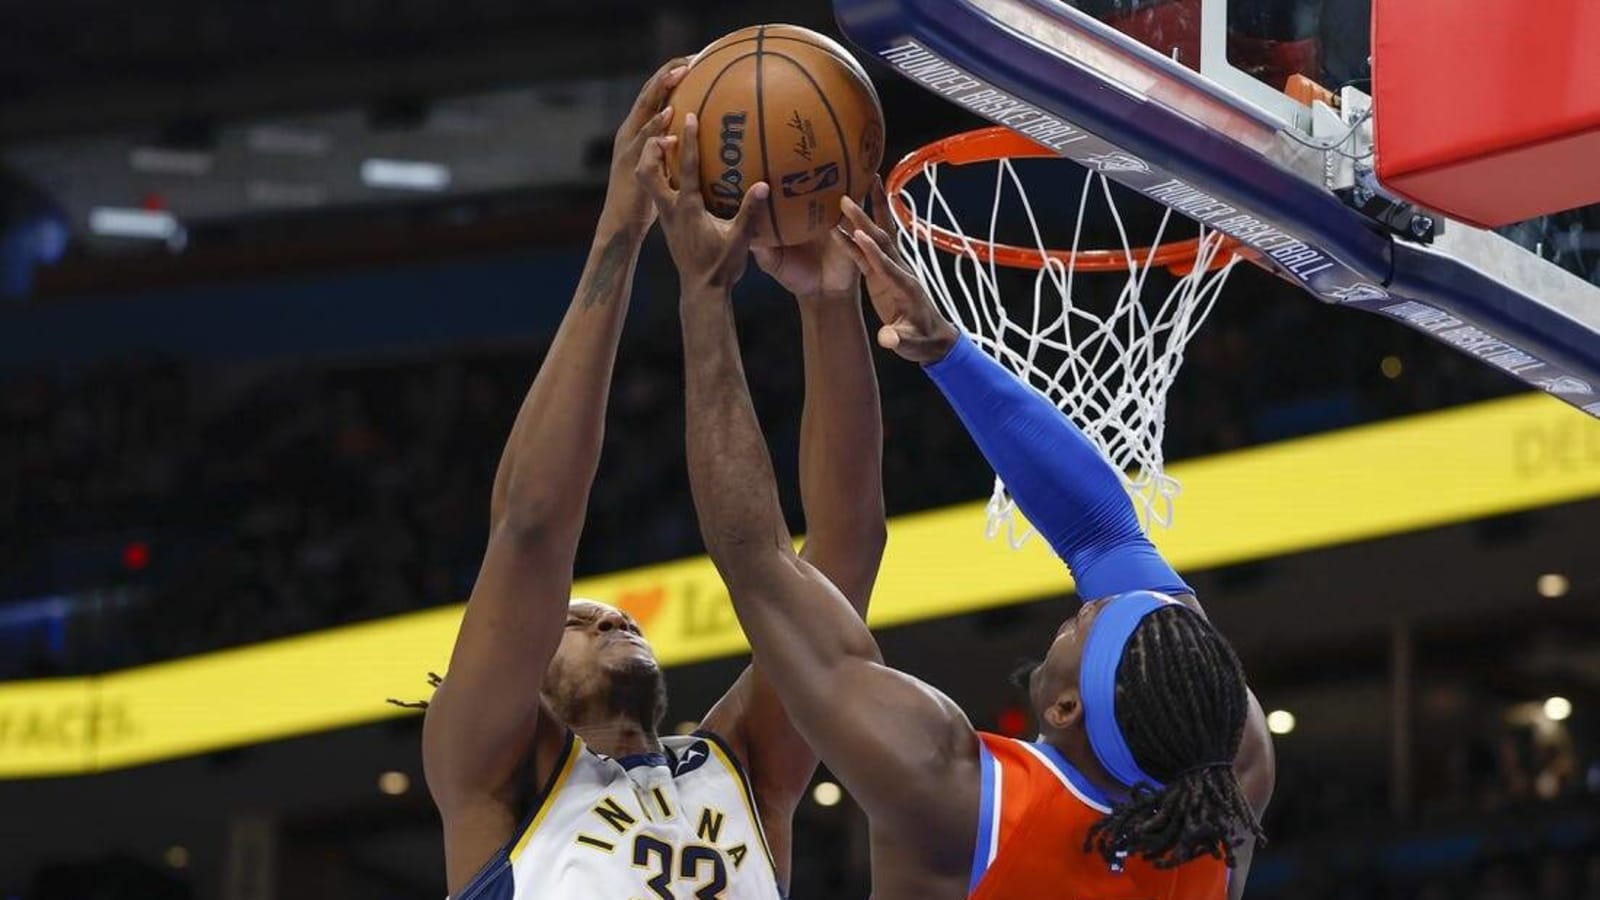 Thunder defeat Pacers to extend win streak to 4